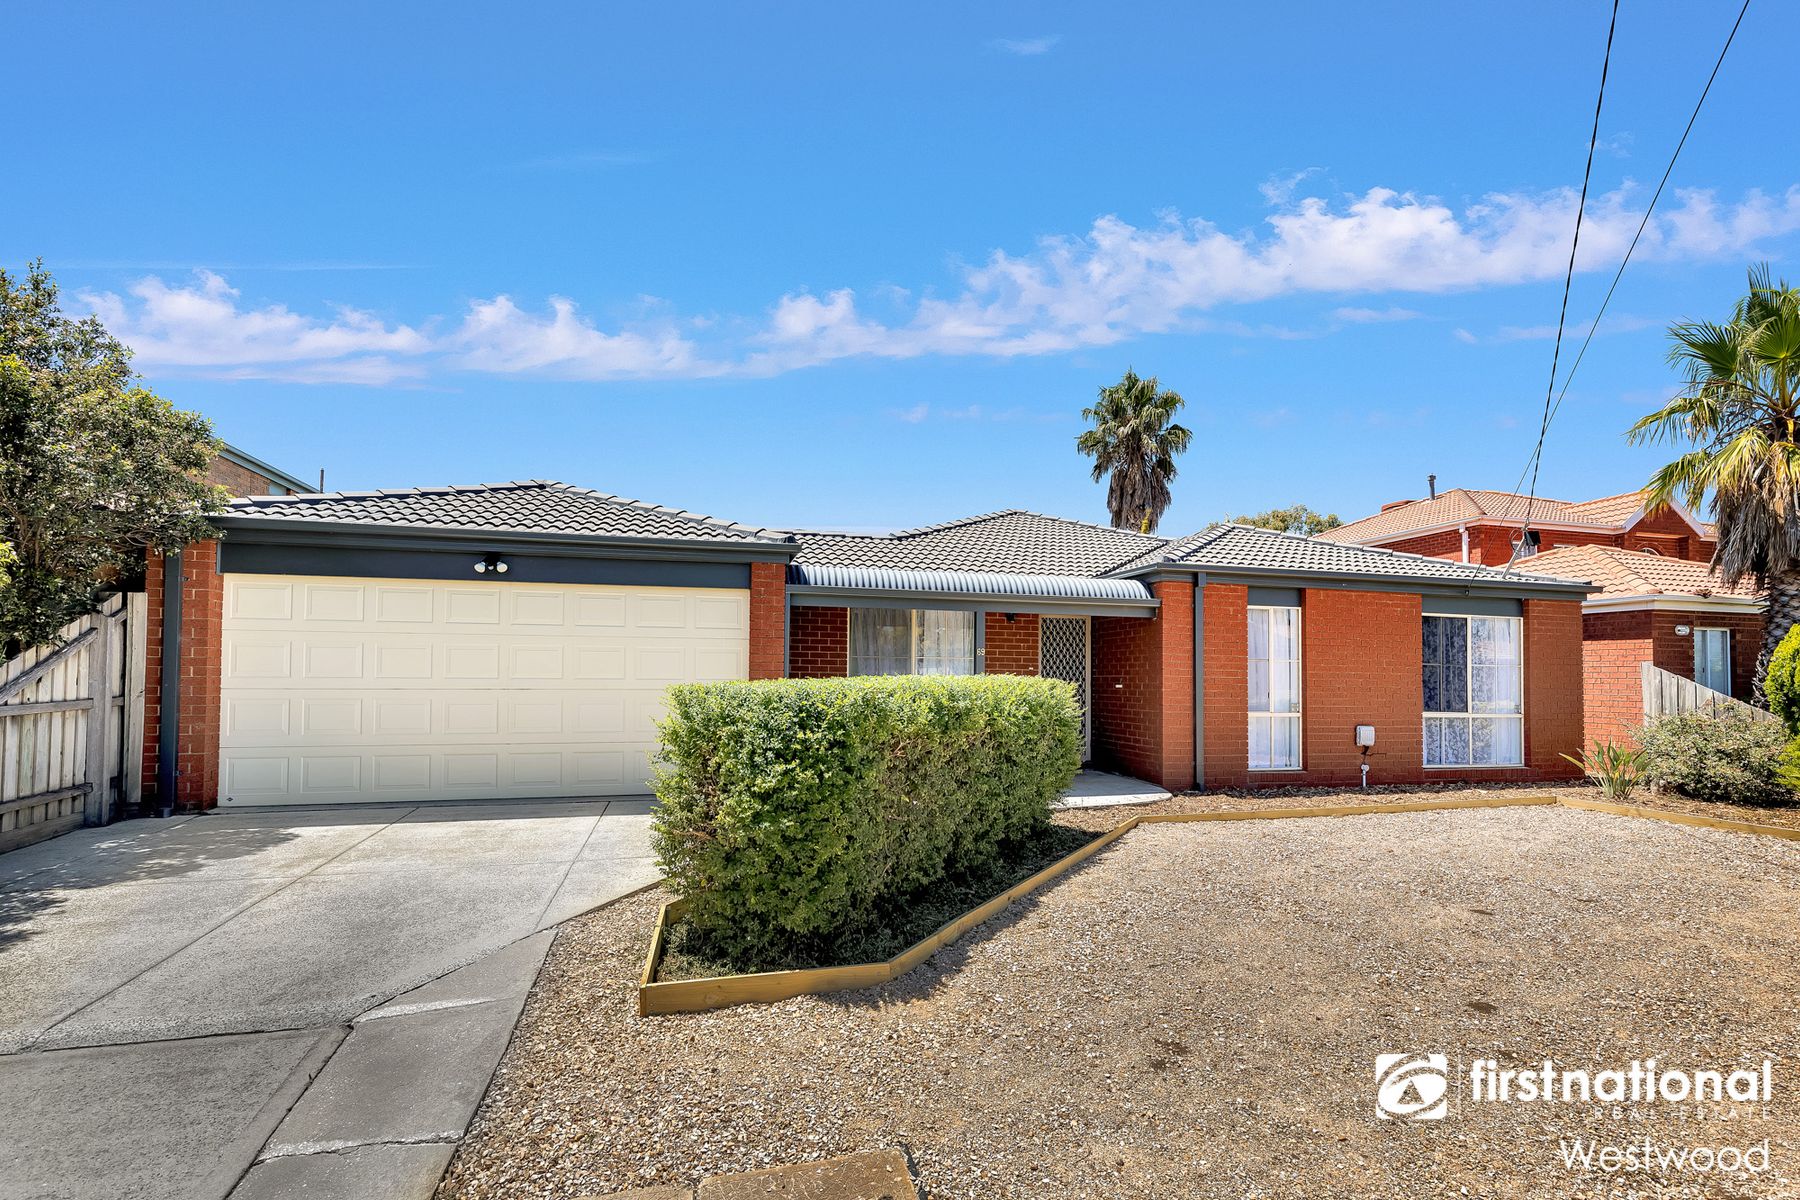 69 Wildflower Crescent, Hoppers Crossing, VIC 3029